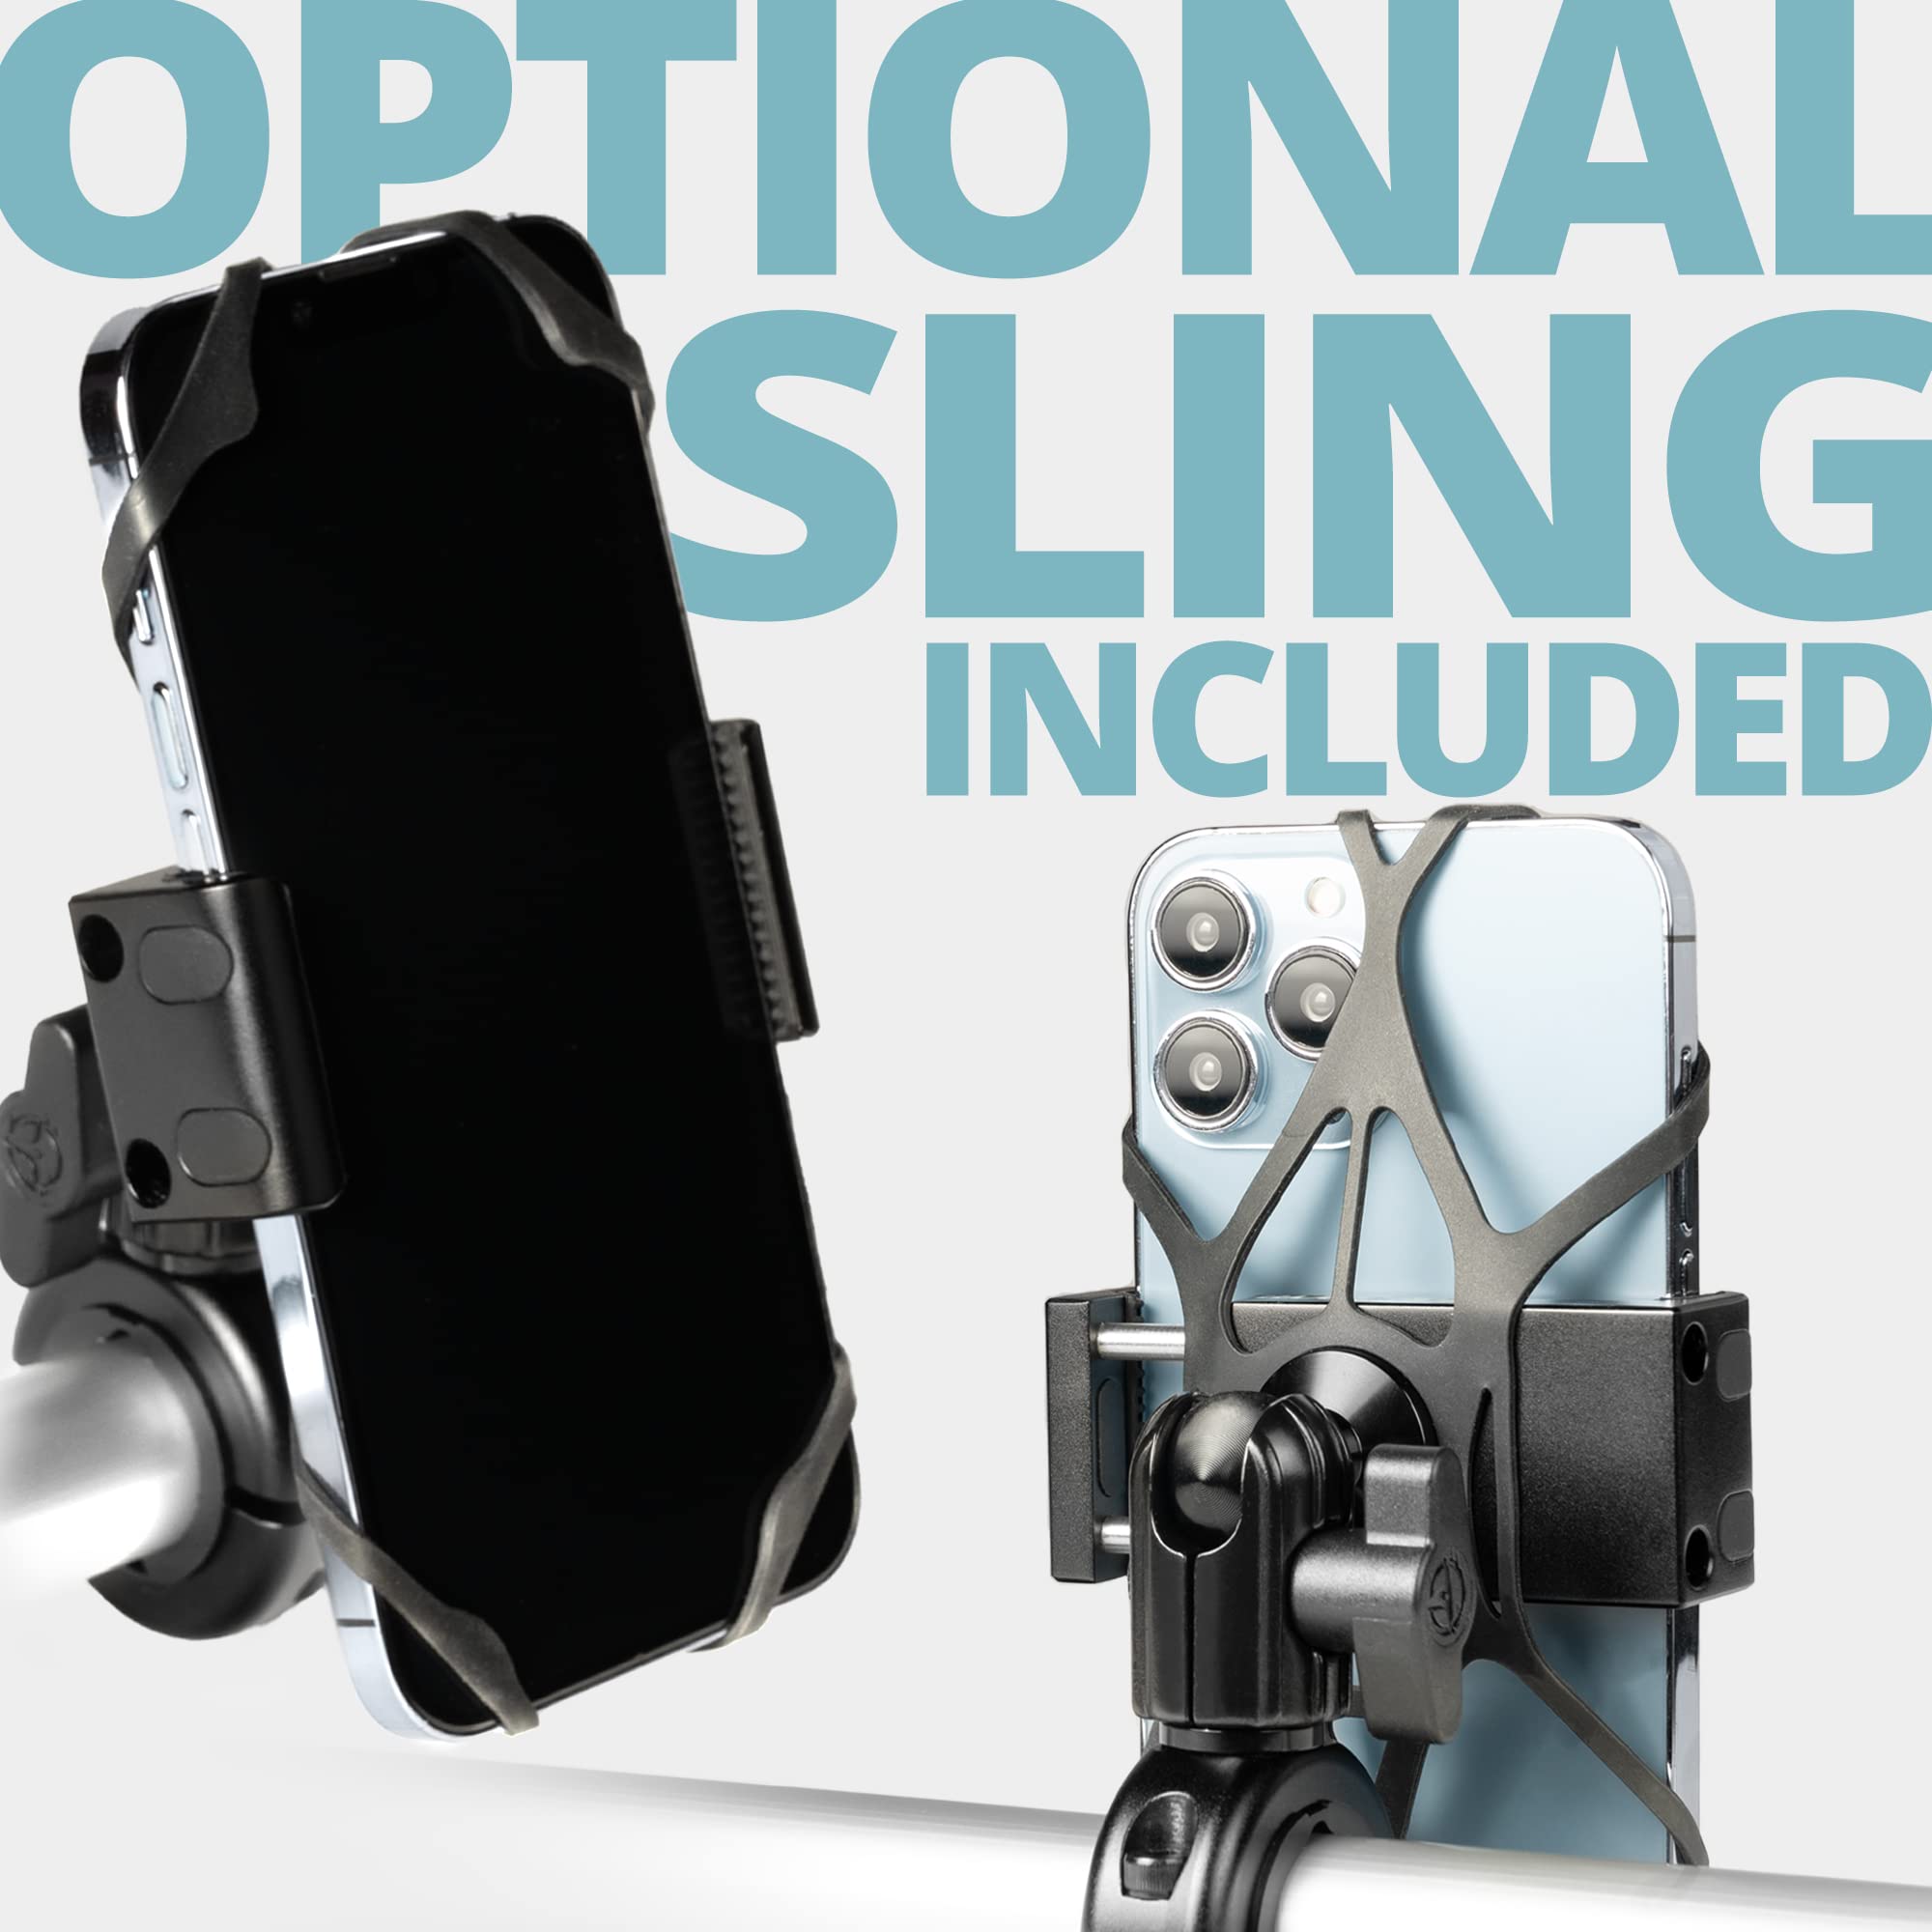 Tackform Metal Motorcycle Mount for Phone [Enduro Series] - NO Slings Needed. Rock Solid Holder Compatible with Regular and Plus Sized iPhone and Samsung Devices. Industrial Spring Grip